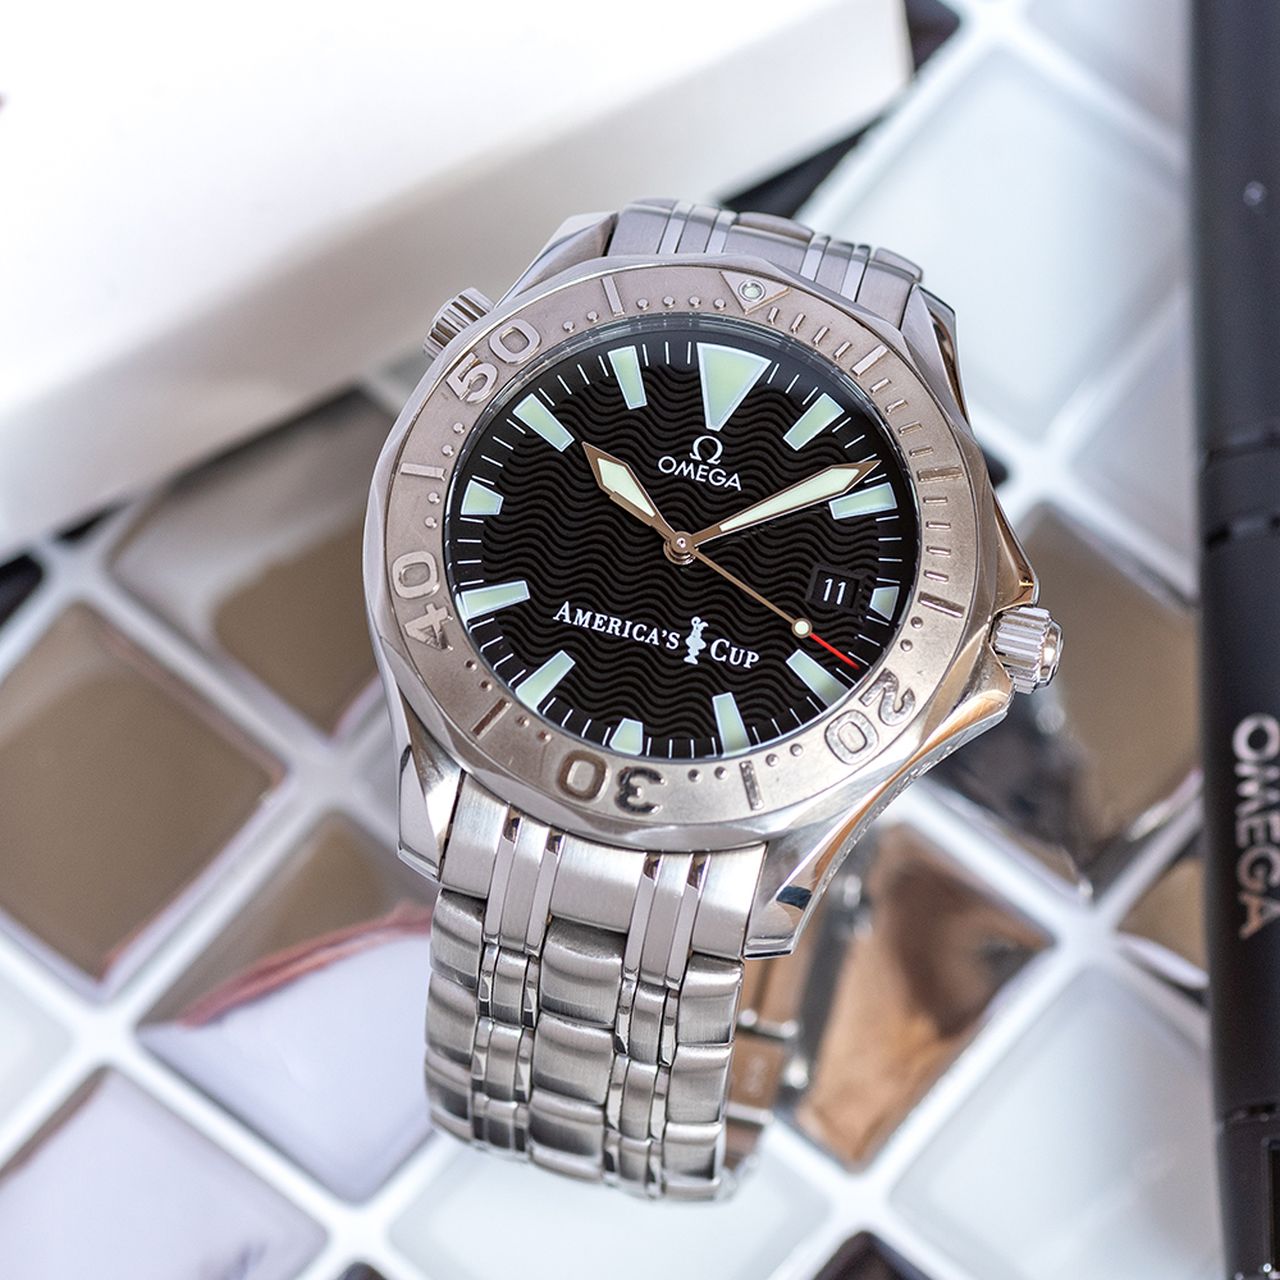 GENTLEMAN'S OMEGA SEAMASTER AMERICA'S CUP 300M LIMITED EDITION, 2533.50.00, CIRCA. 2000/02, 41MM - Image 2 of 9